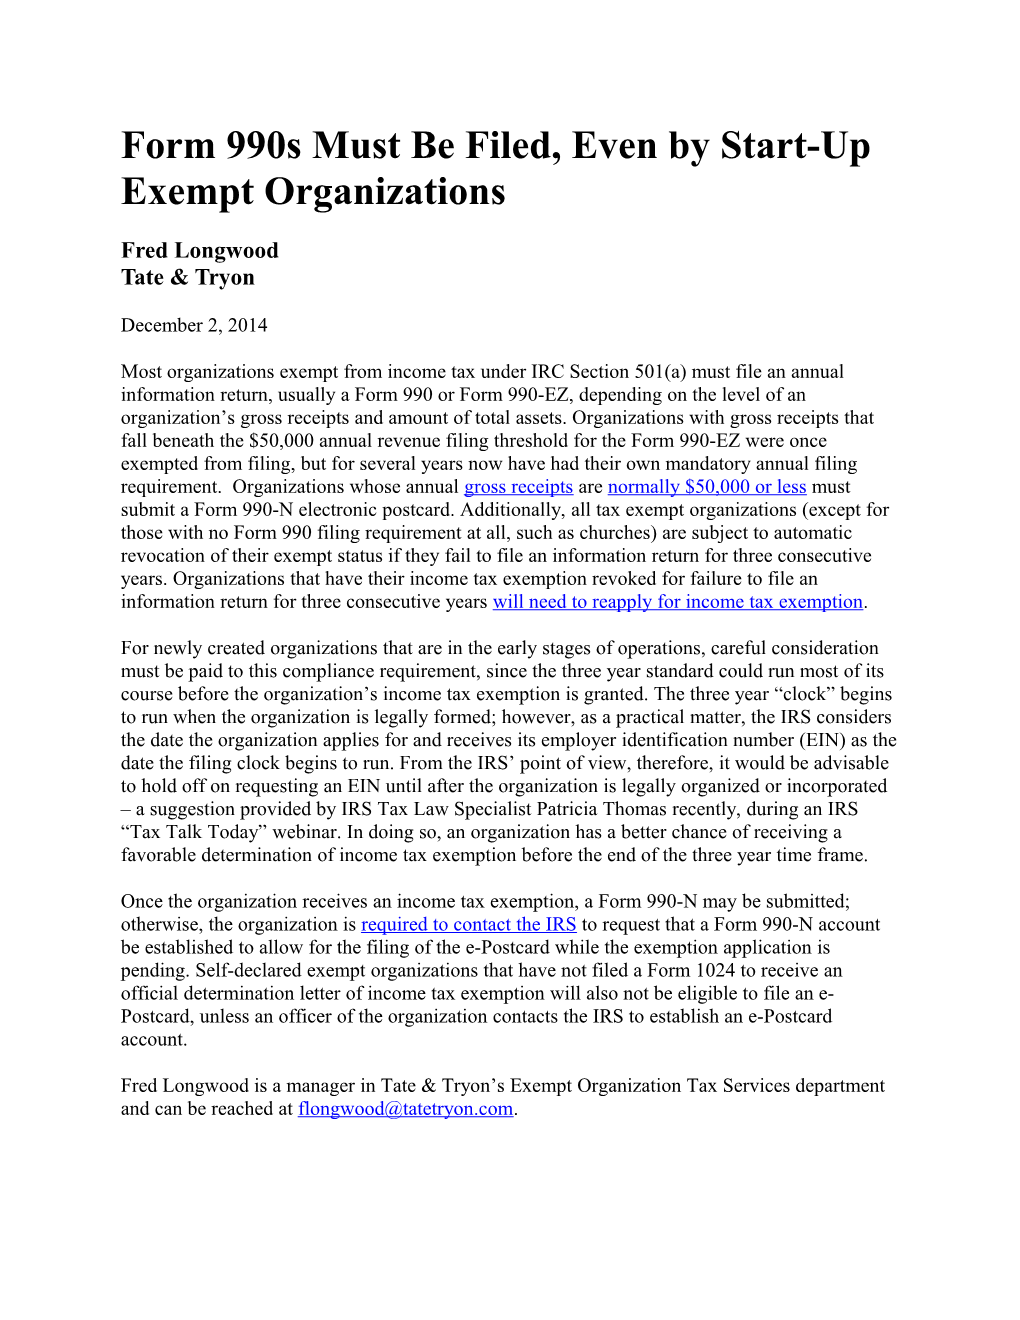 Form 990S Must Be Filed, Even by Start-Up Exempt Organizations